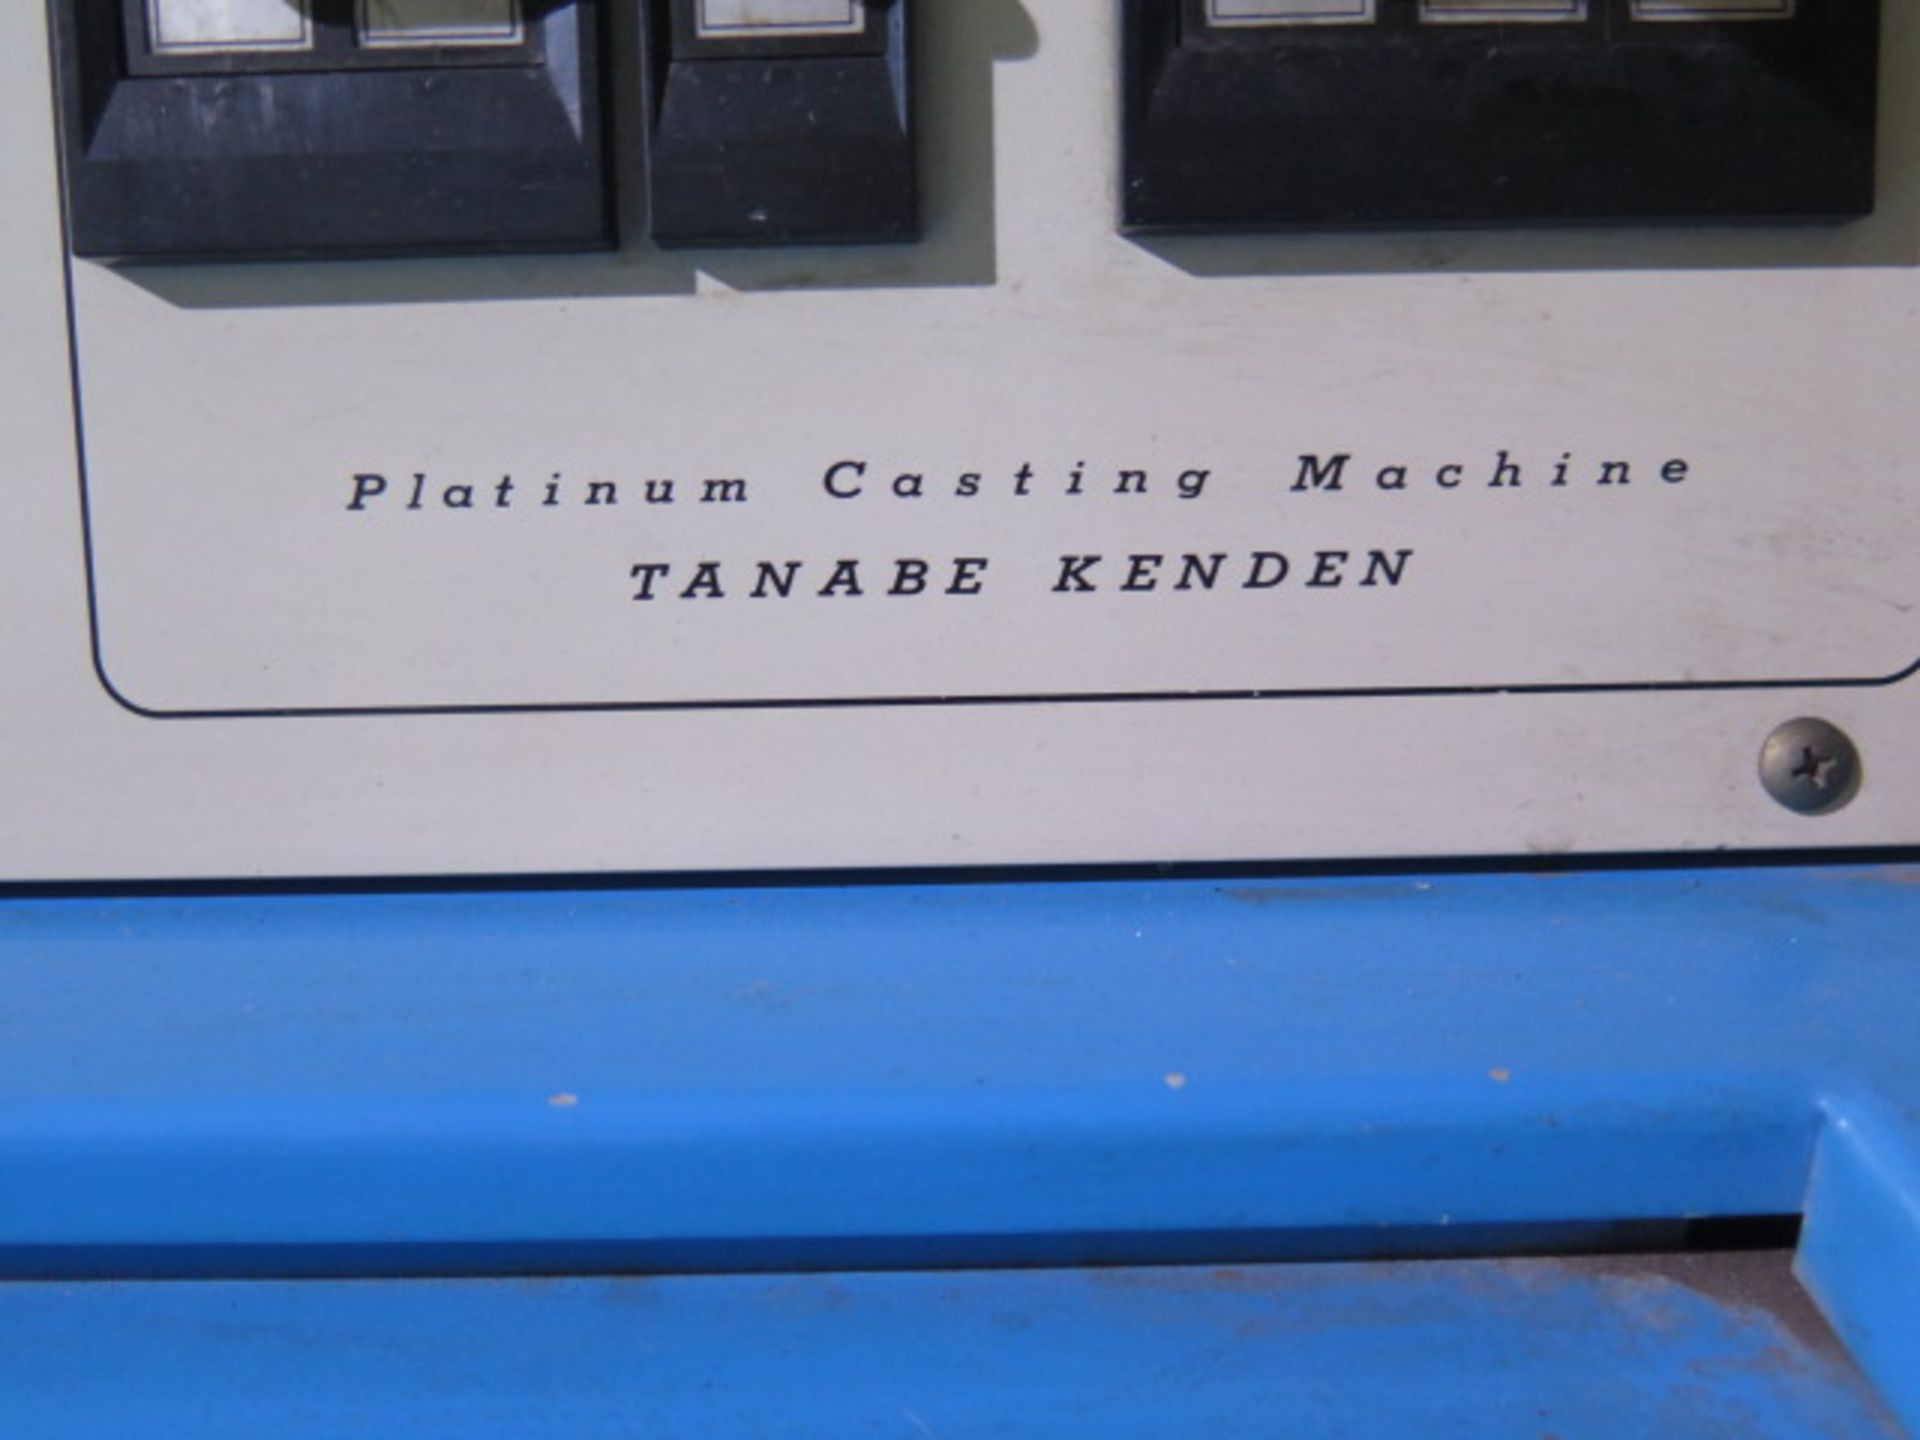 1999 Tanabe Kenden type TCP-3300 Platinum Casting Furnace s/n 9906 w/ 60KHz 7kW Output - Image 3 of 6